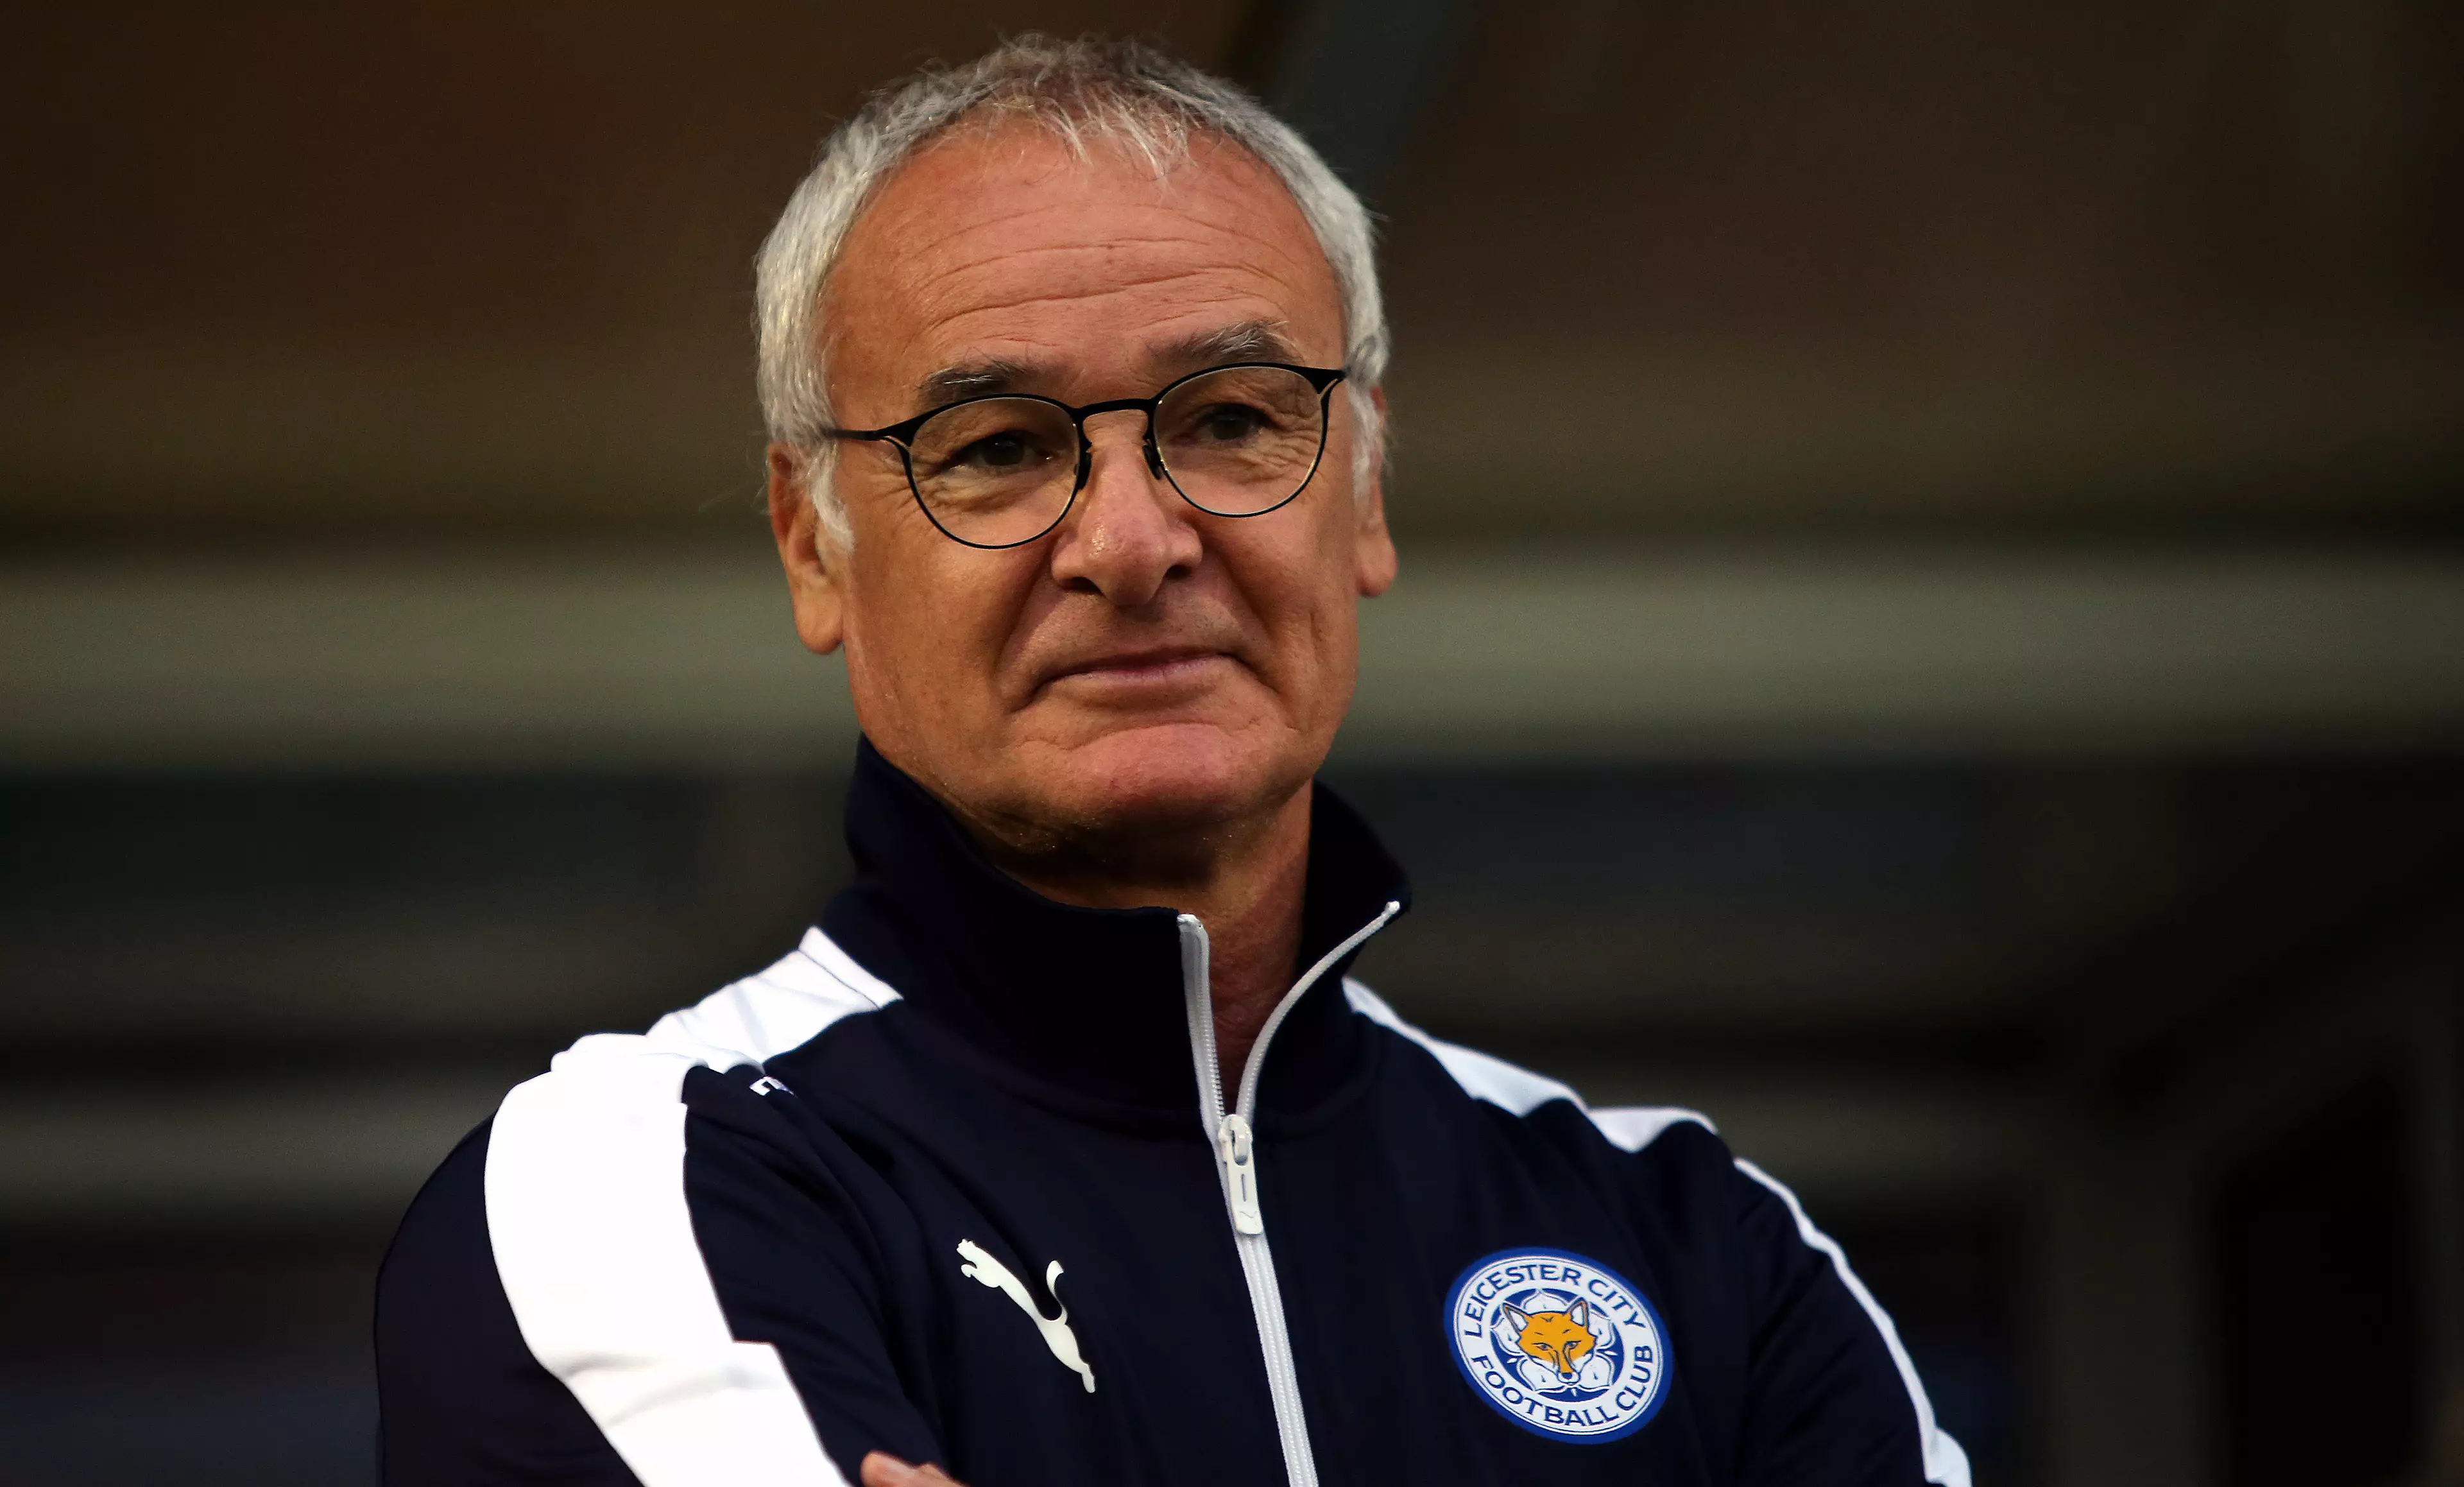 Ranieri didn't even get a year after winning the Premier League. Image: PA Images.